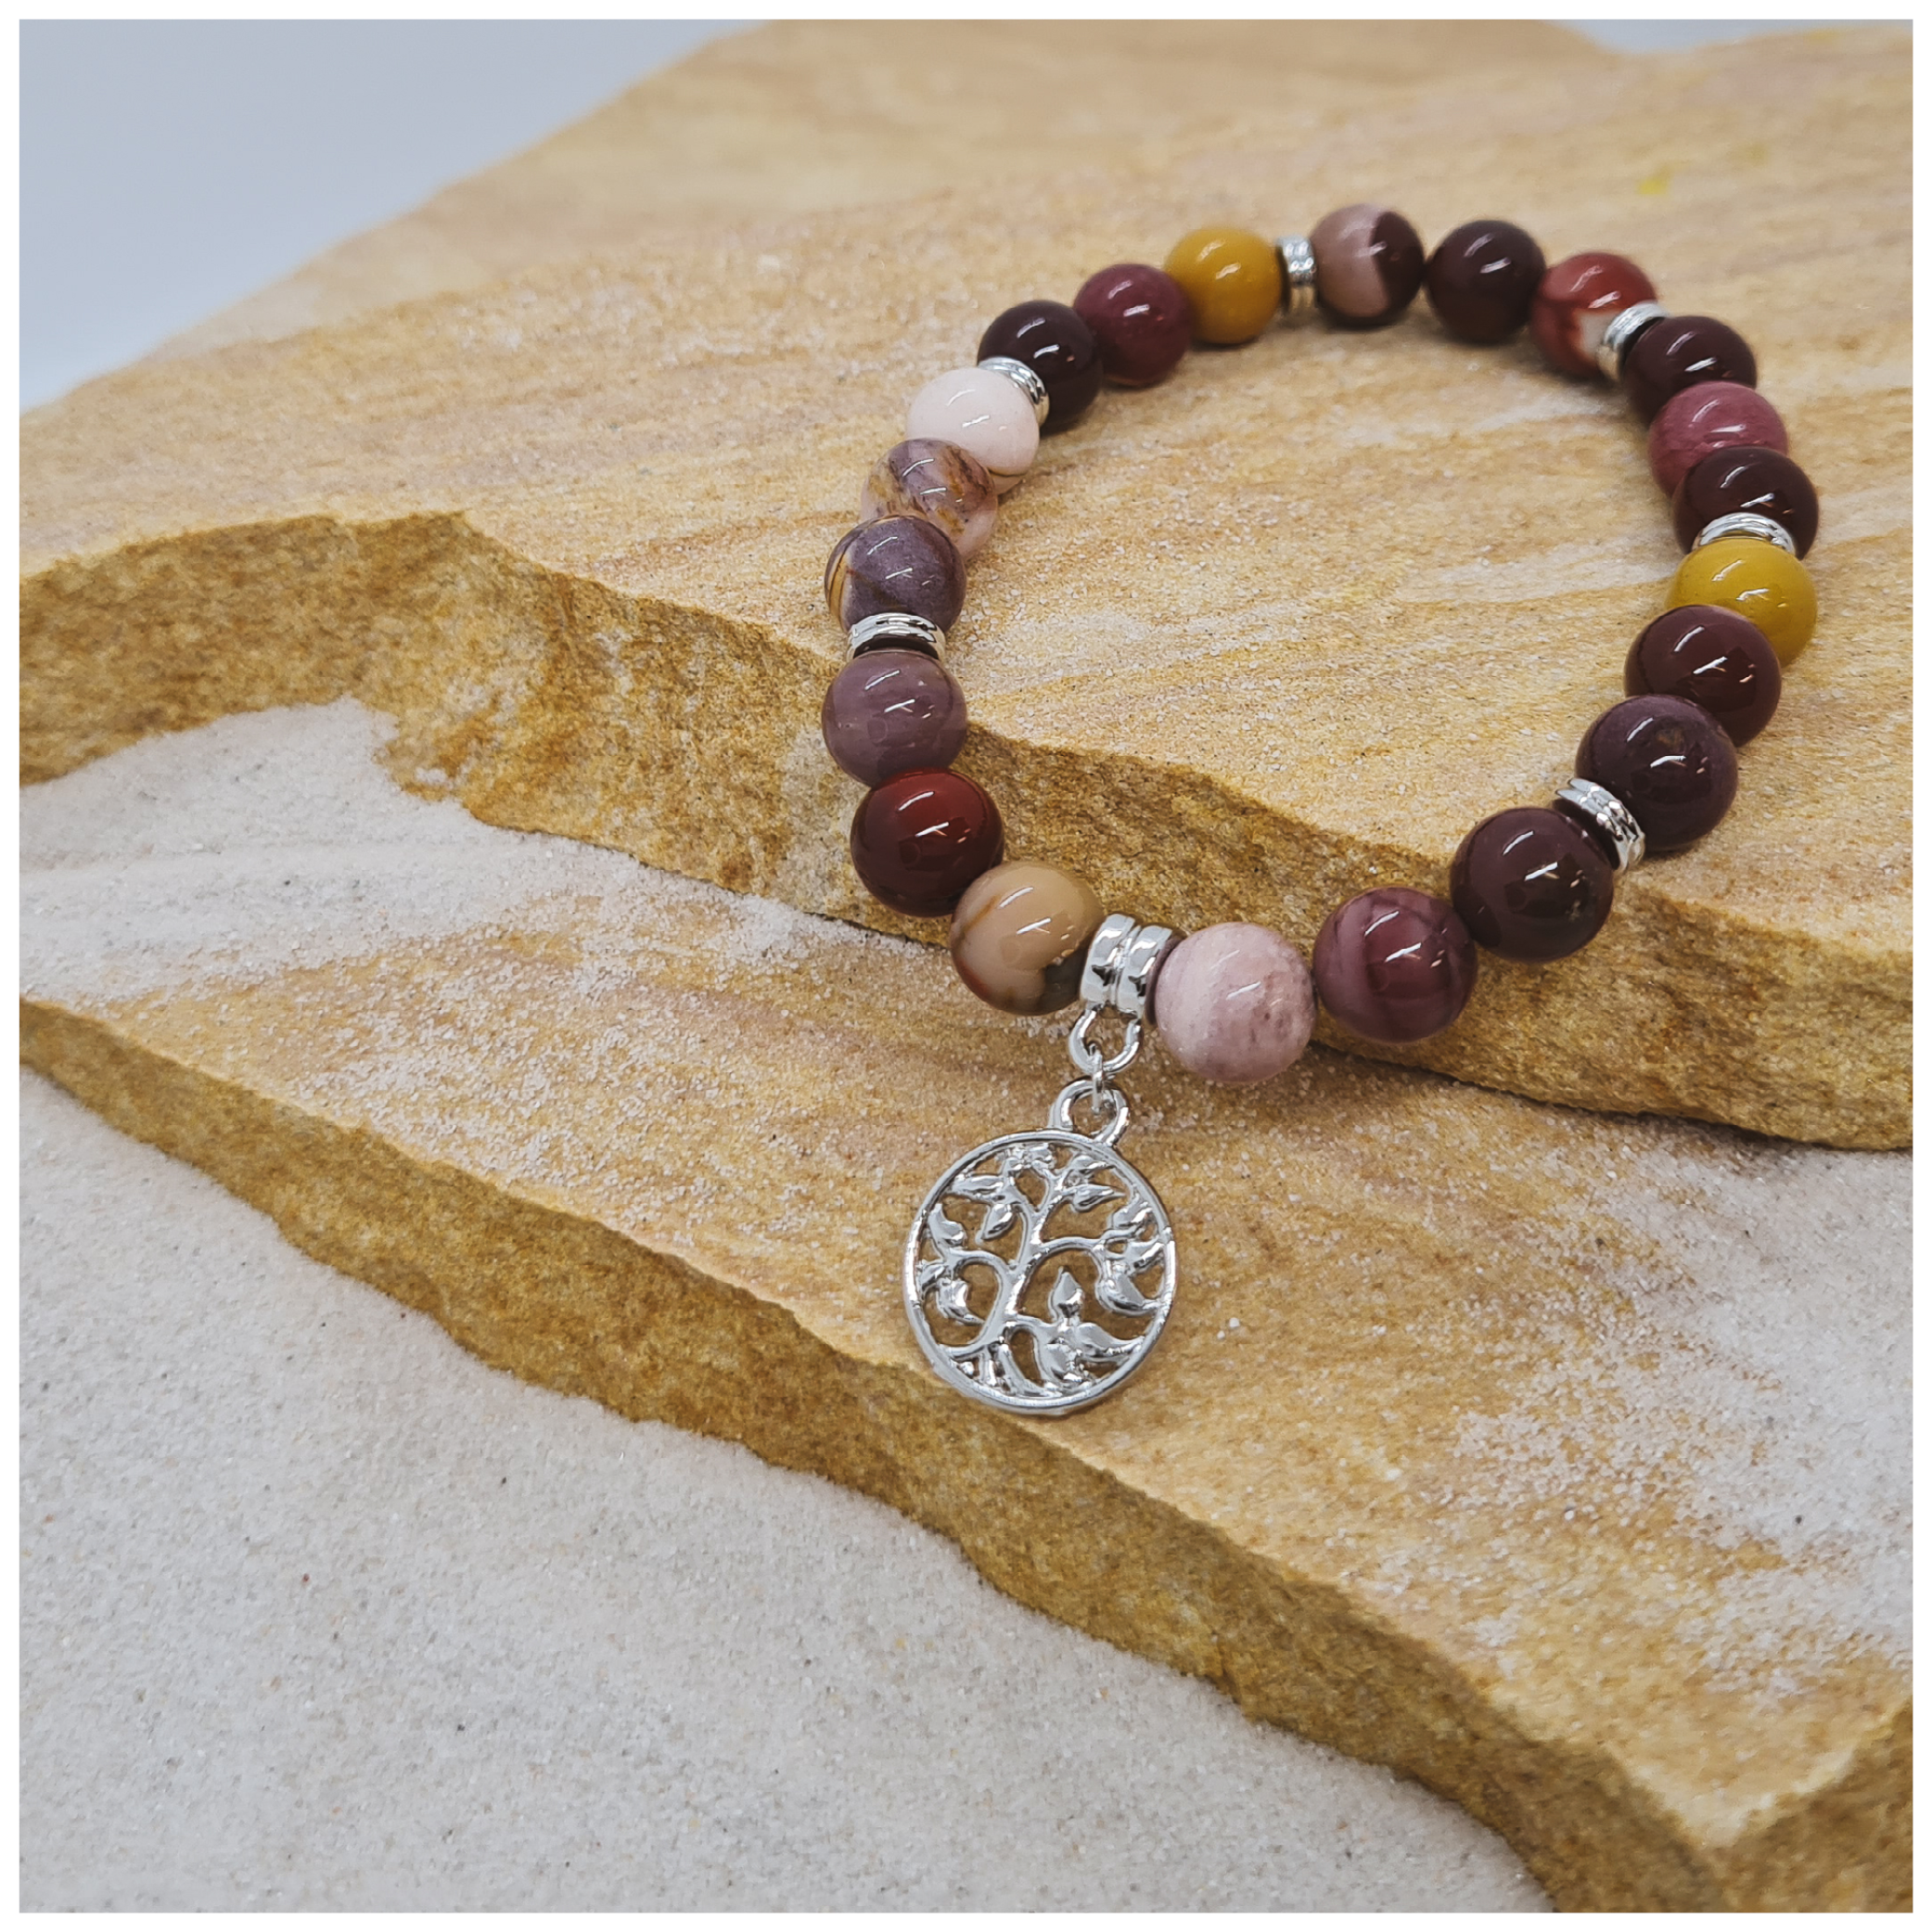 Mookaite 8mm crystal bead bracelet with silver tree of life charm